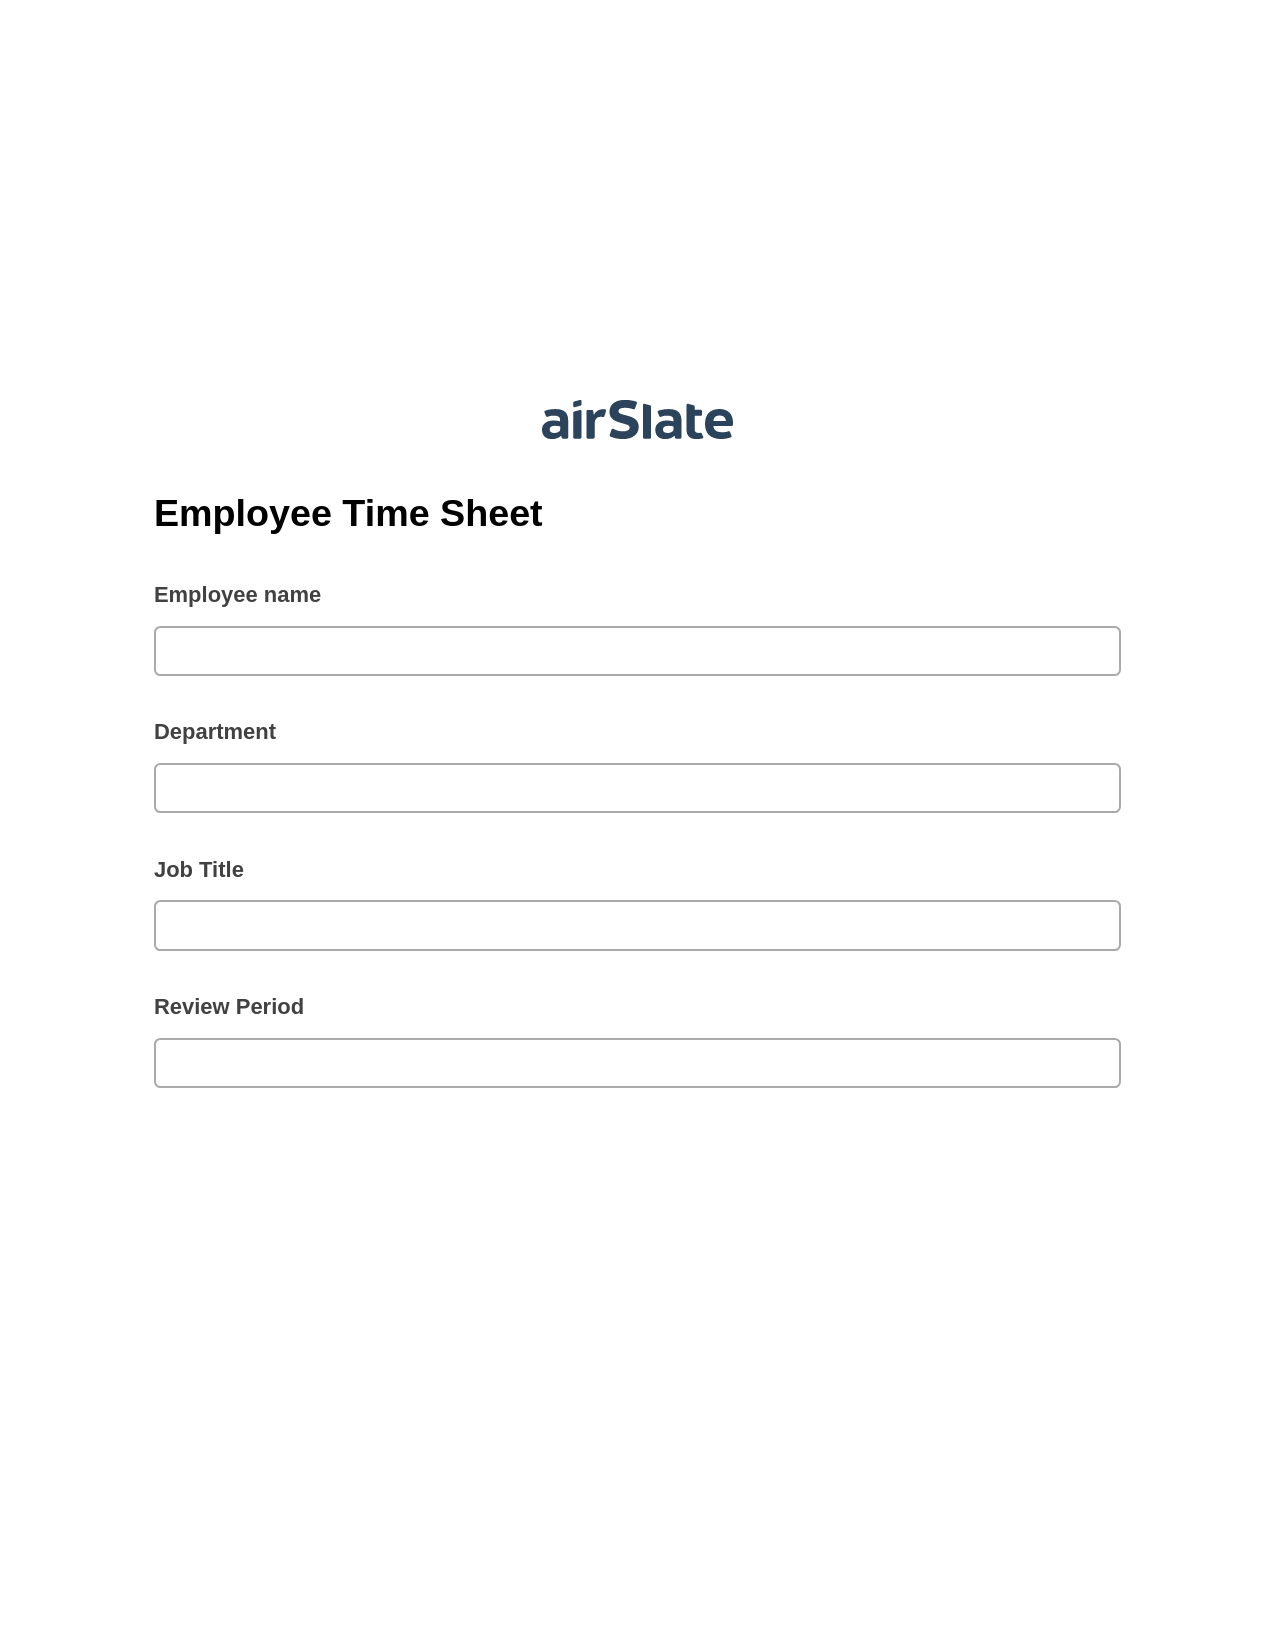 Employee Time Sheet Pre-fill Dropdowns from Excel Bot, Create slate addon, Archive to Google Drive Bot